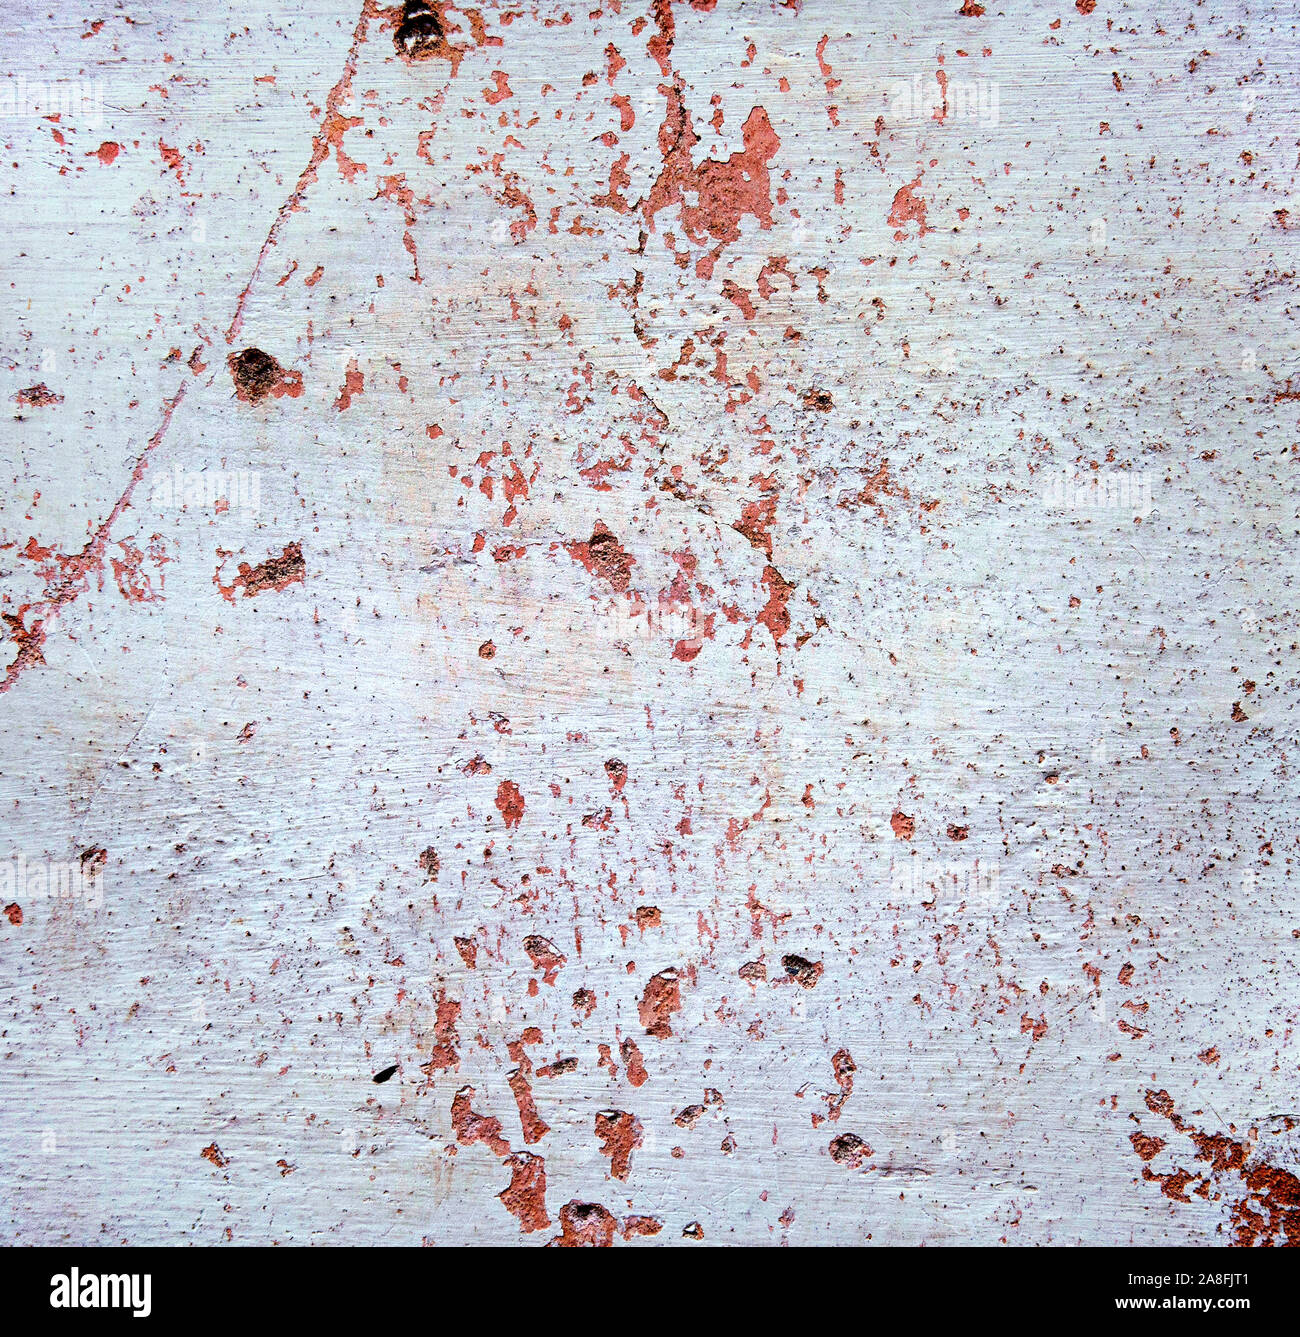 Grunge texture . Red stains , scratches and dots on white background . Wall surface . Stock Photo